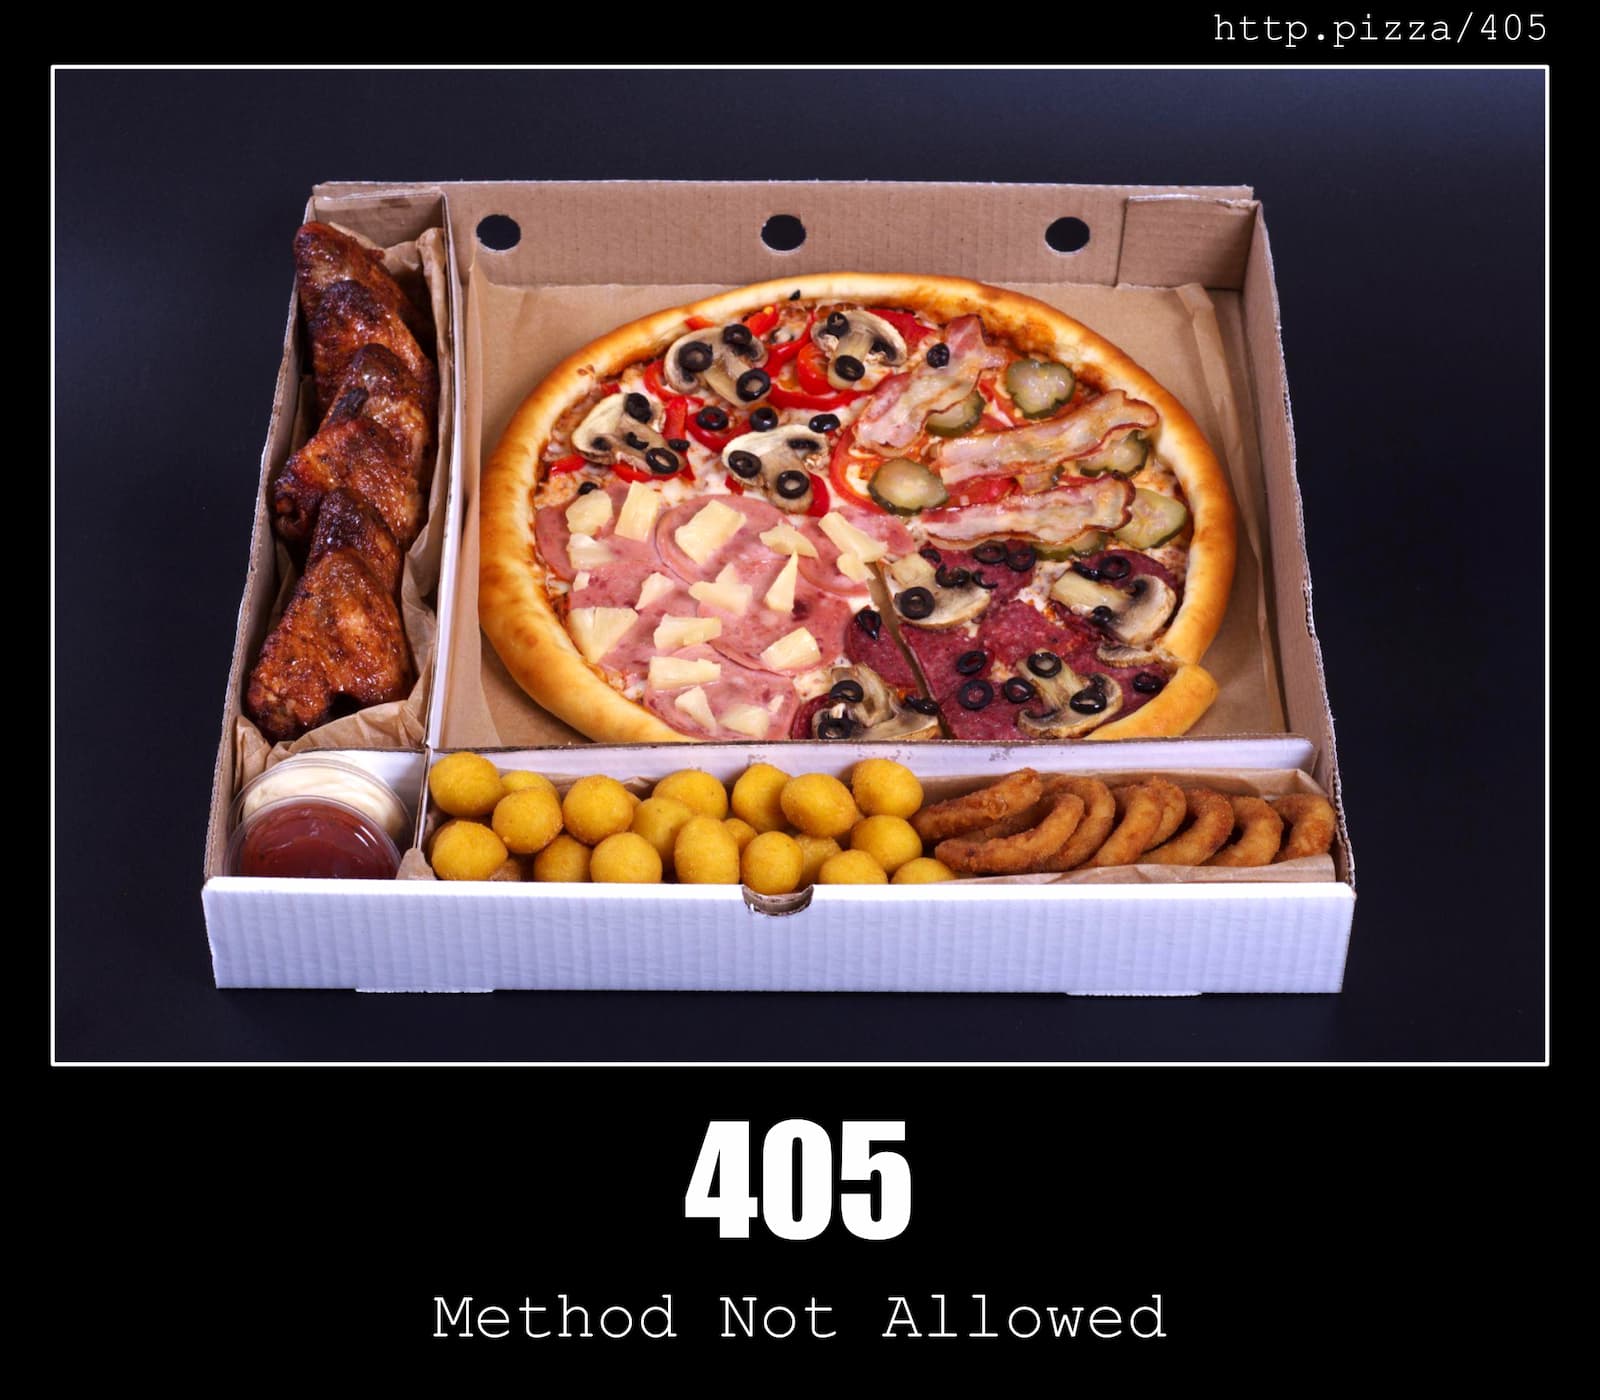 HTTP Status Code 405 Method Not Allowed & Pizzas